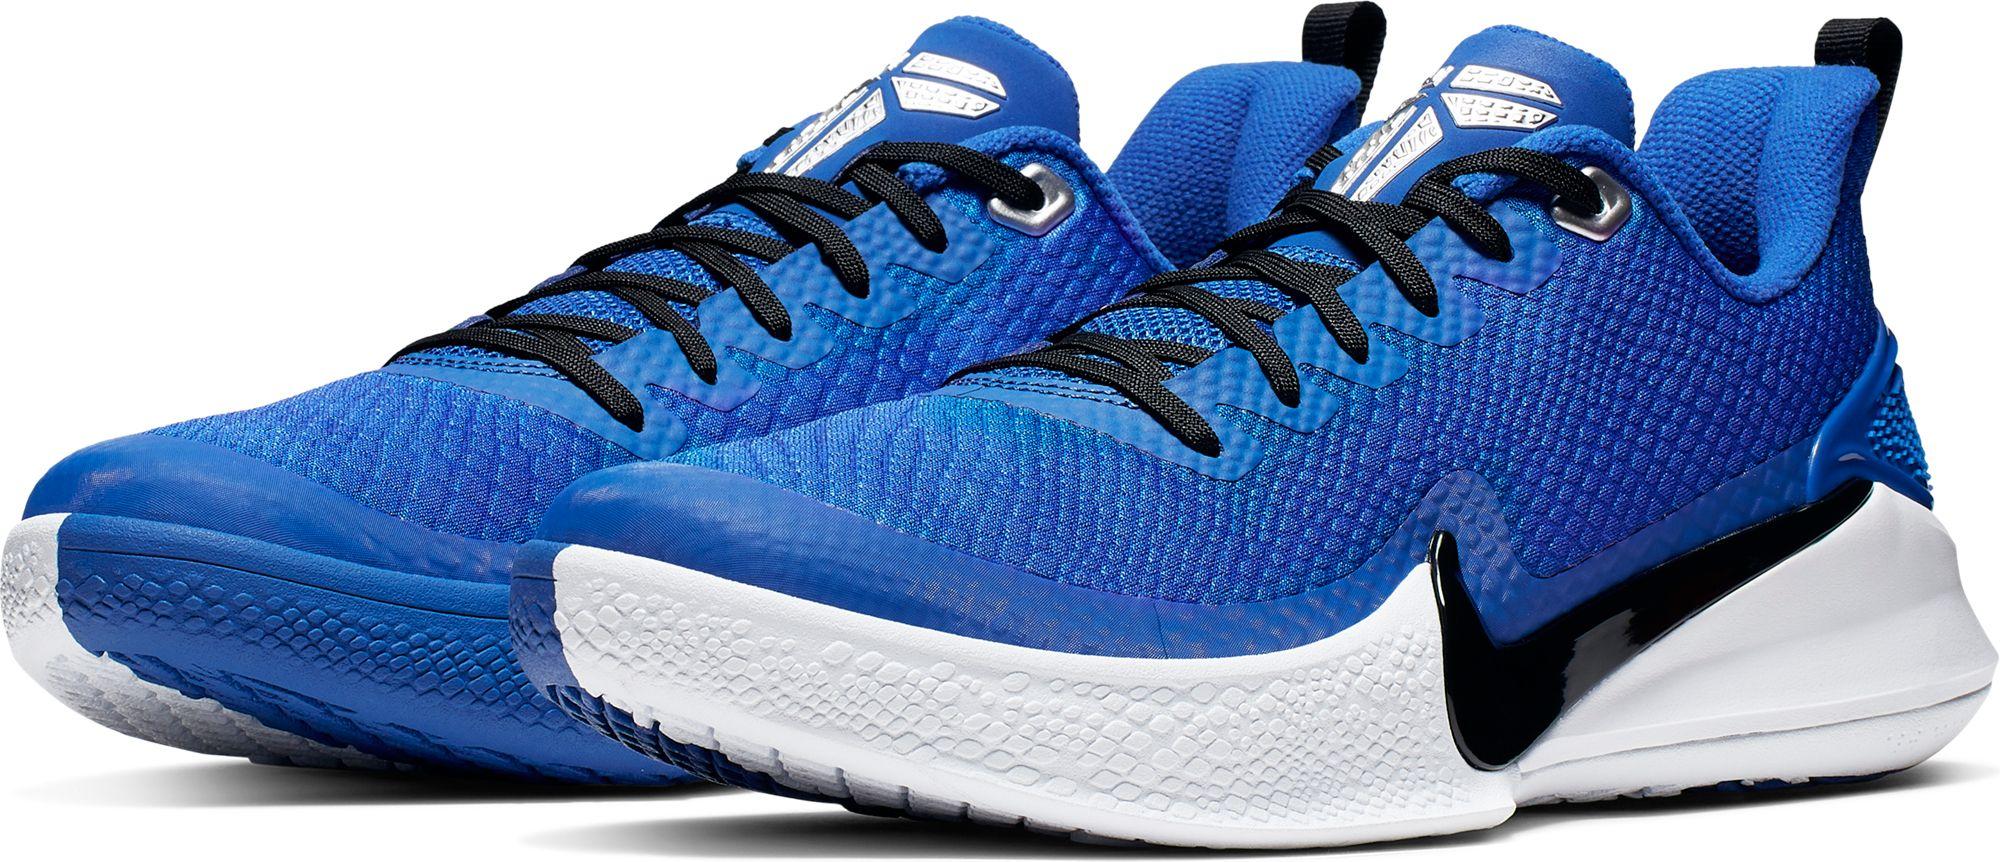 Nike Mamba Focus Basketball Shoes in 